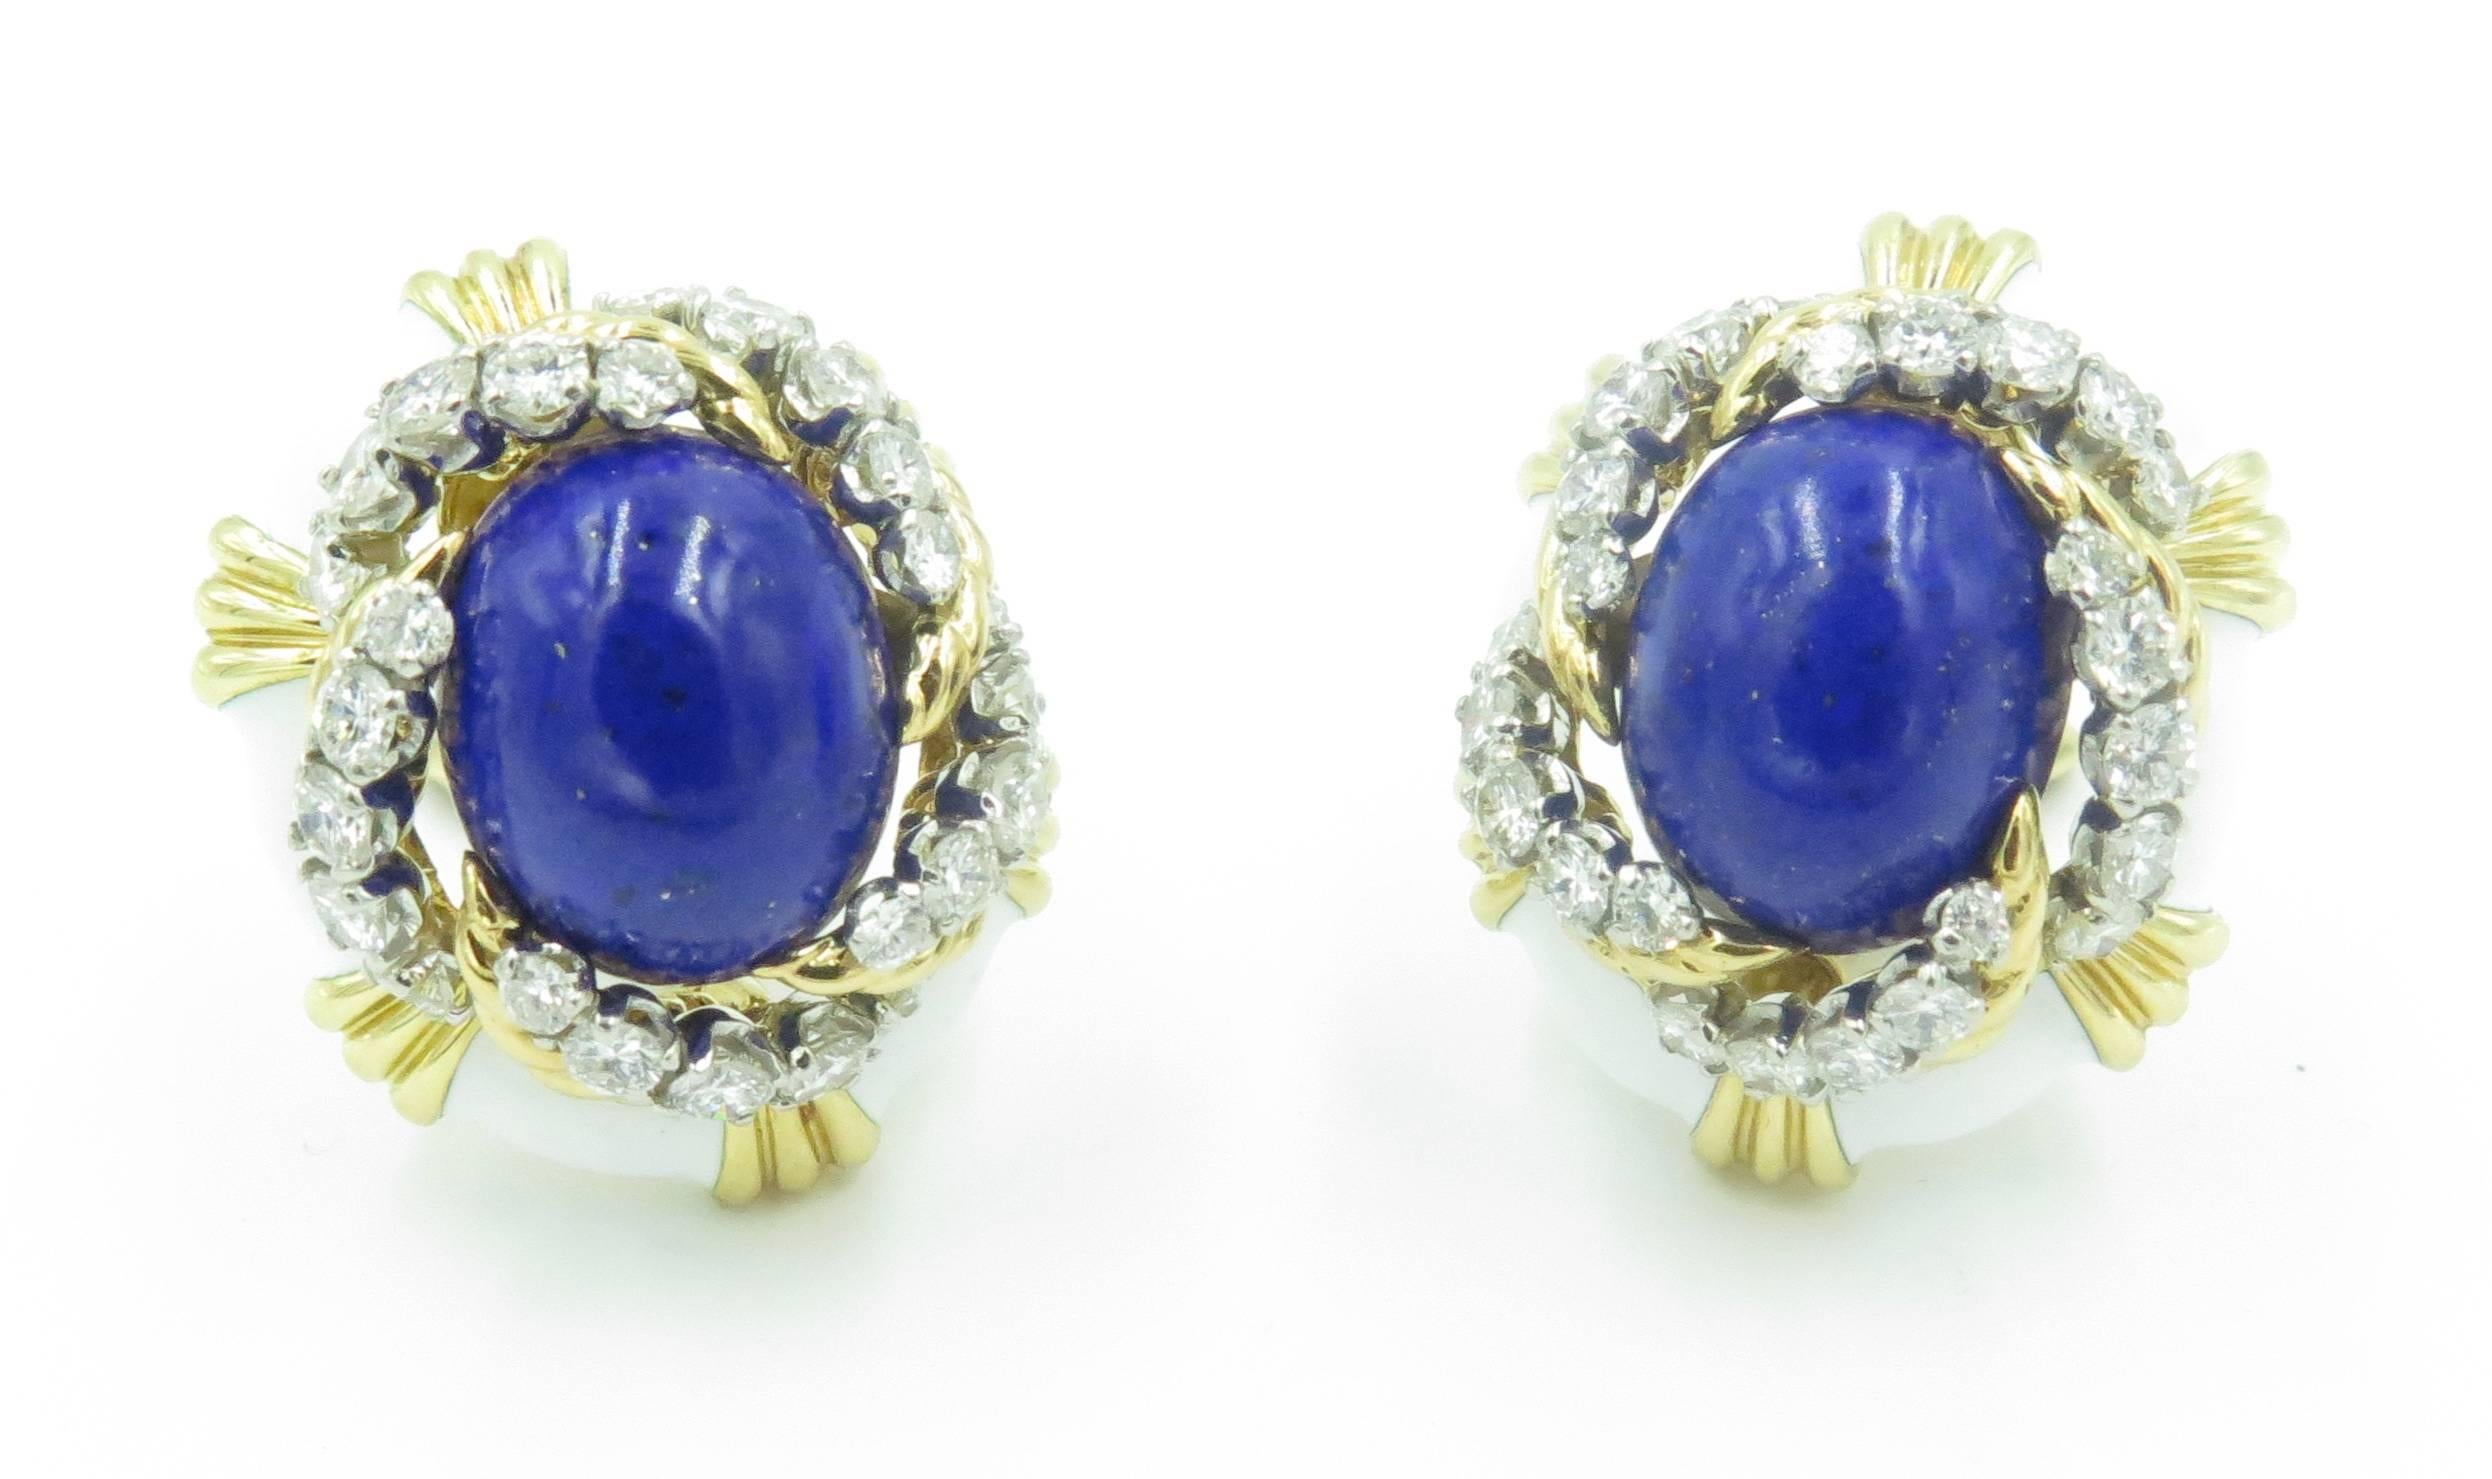 A pair of 18 karat yellow gold, white enamel, lapis lazuli and diamond earrings.  David Webb. Circa 1990. Each designed as a white enamel oval plaque, with fluted gold accents, centering an oval lapis lazuli cabochon, measuring approximately 15.00 x